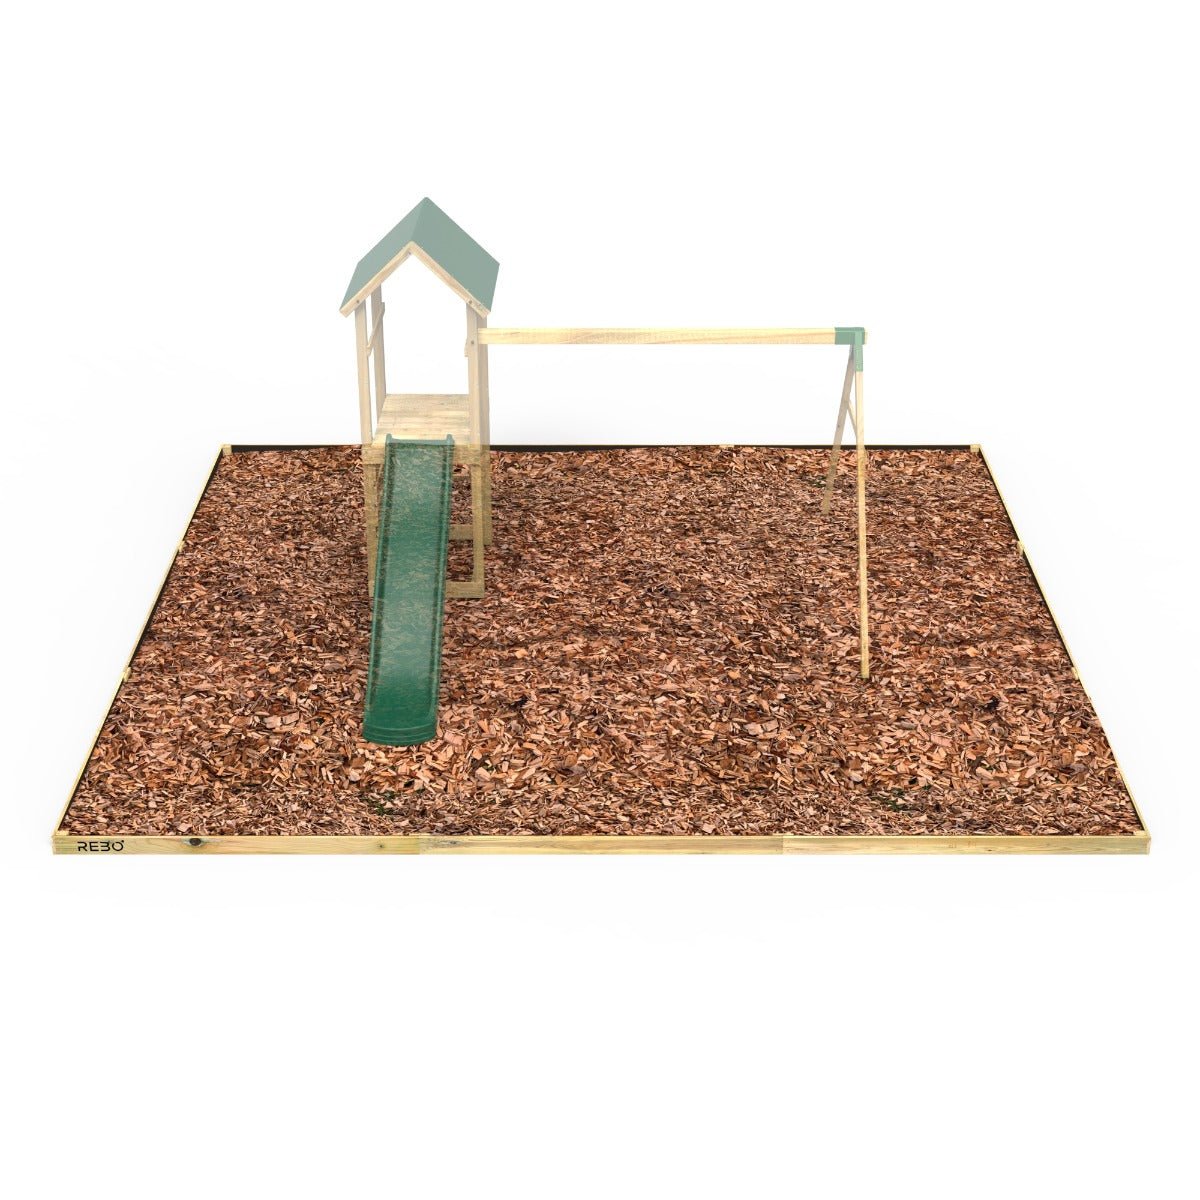 Rebo Safety Play Area Protective Bark Wood Chip Kit - 6.3M x 5.1M